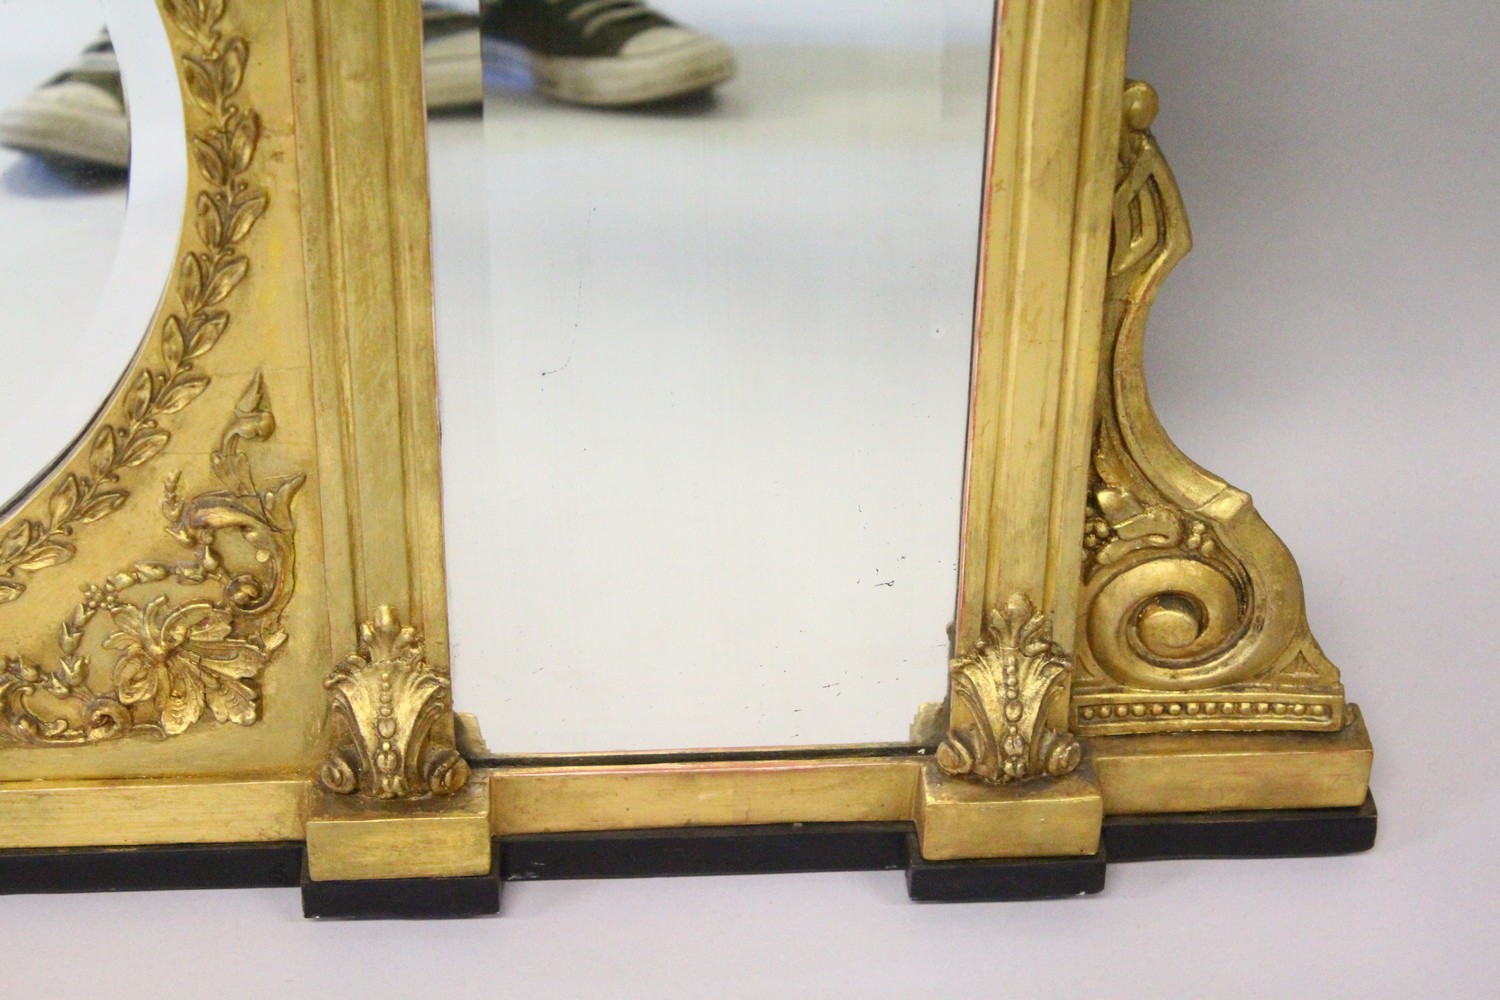 A VERY GOOD GILTWOOD OVERMANTLE MIRROR with oval mirrored panels and rectangular mirror in an ornate - Image 5 of 6